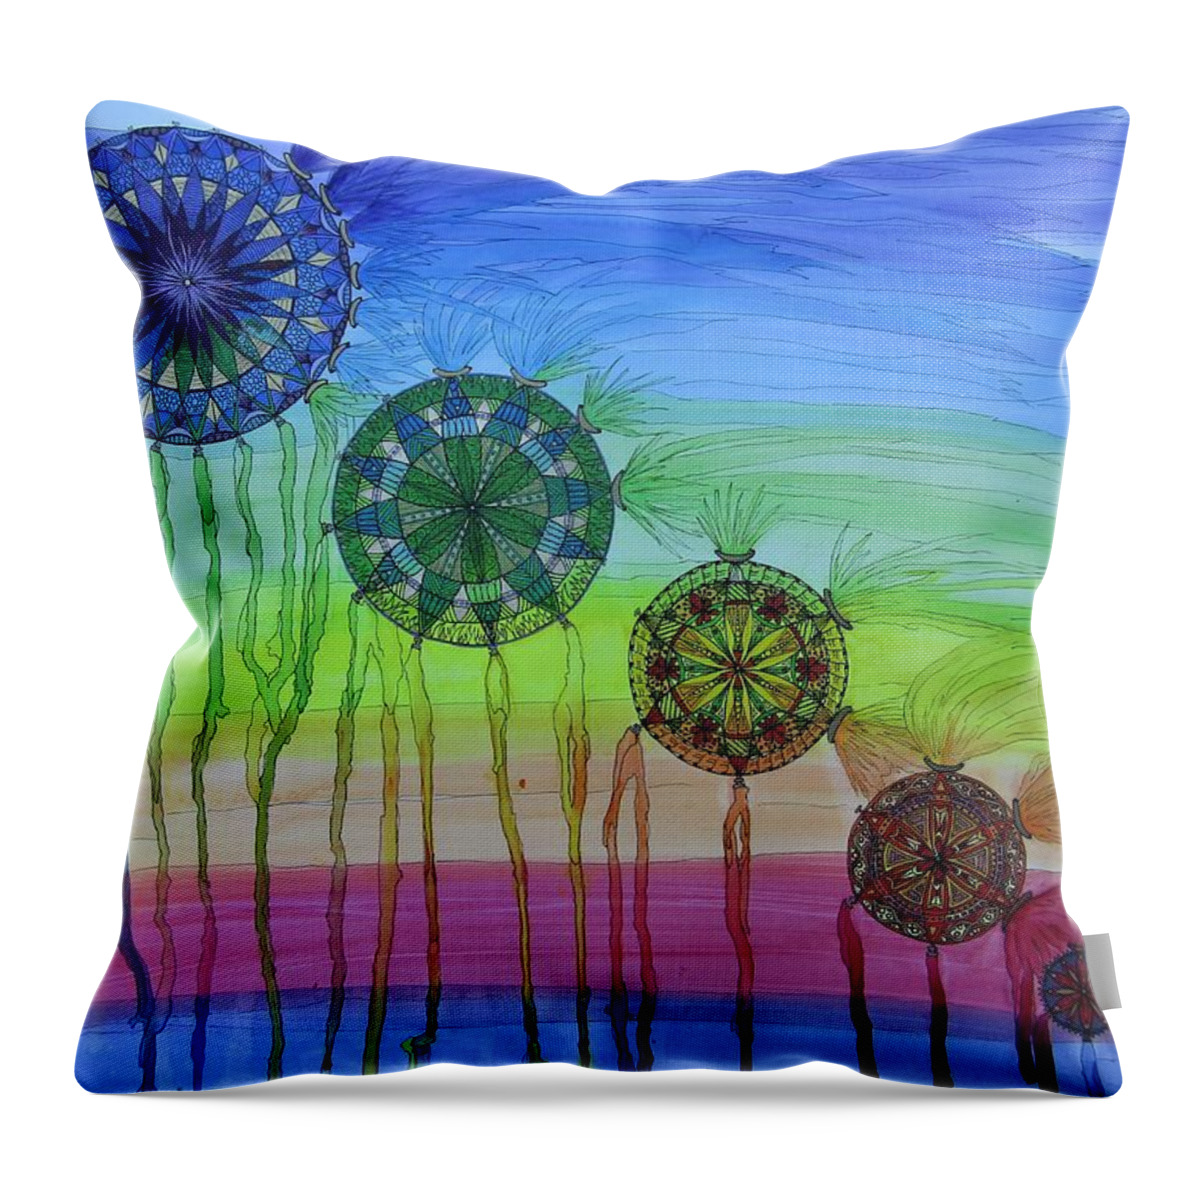 Dreams Throw Pillow featuring the painting Filtering Dreams by Anita Hillsley